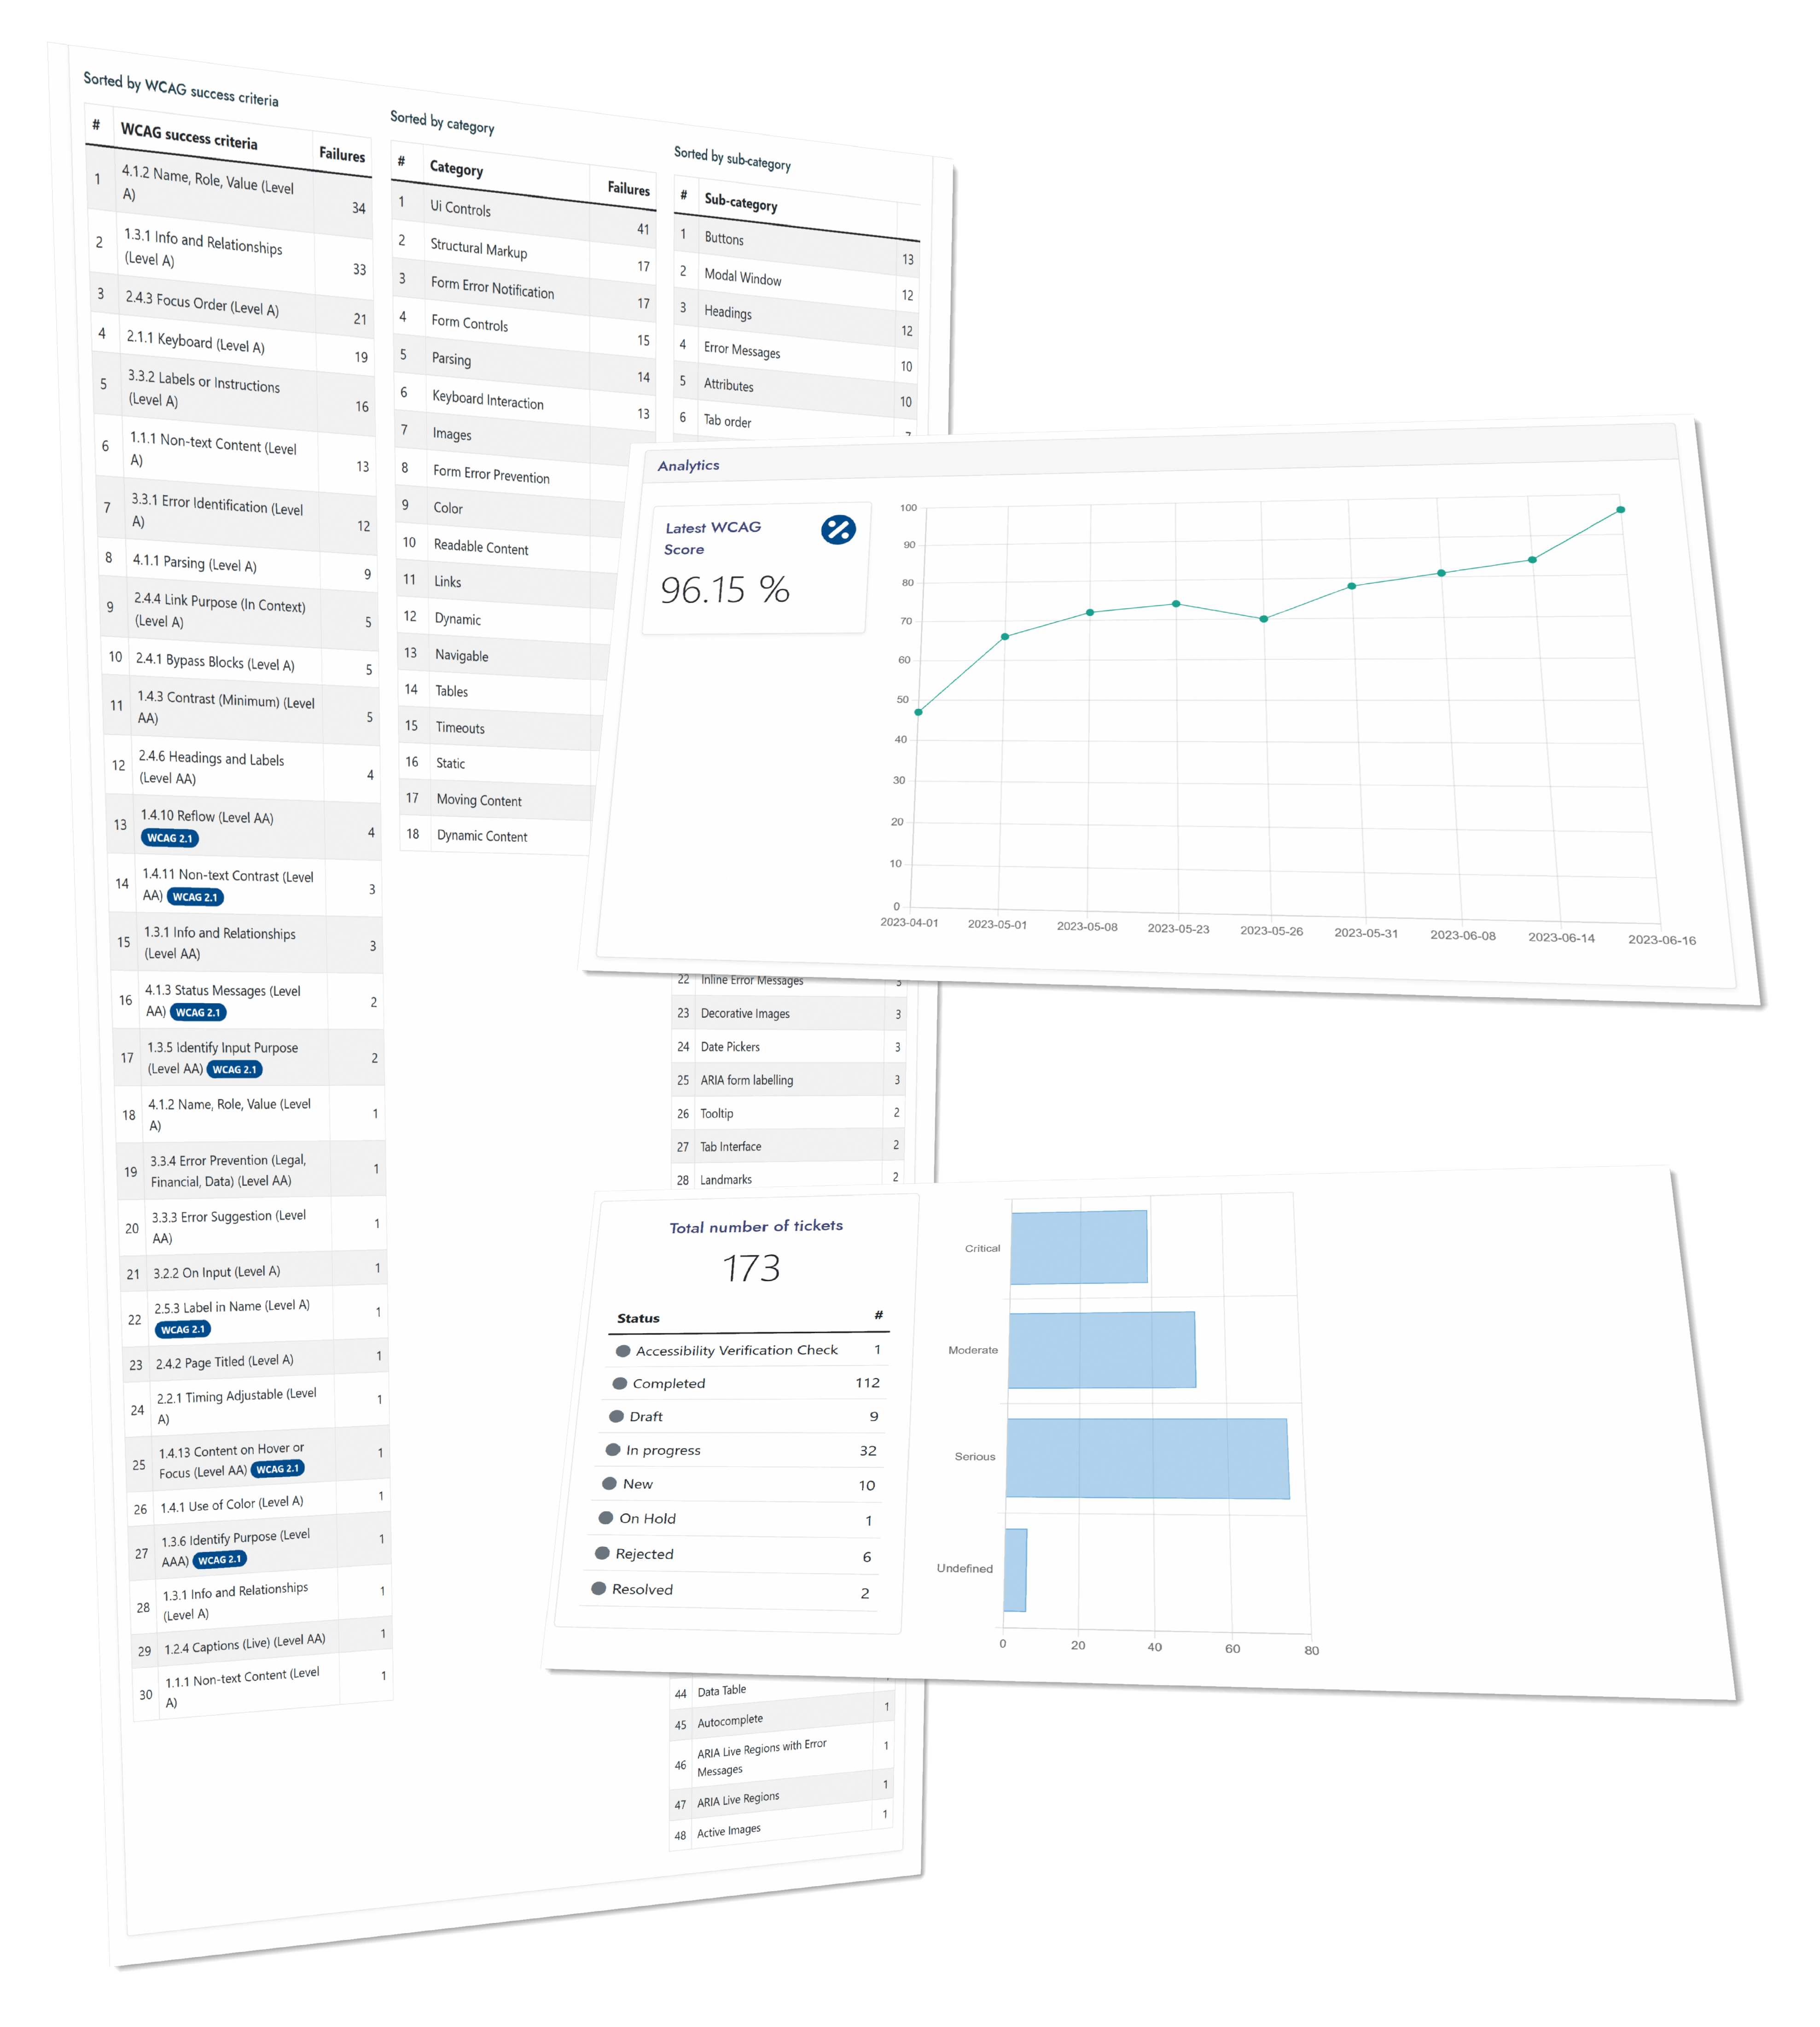 Several screenshots from the A11yn dashboard. A sorted list of tickets, a line graph of increased compliance over time, and a bar graph of tickets by severity are shown.